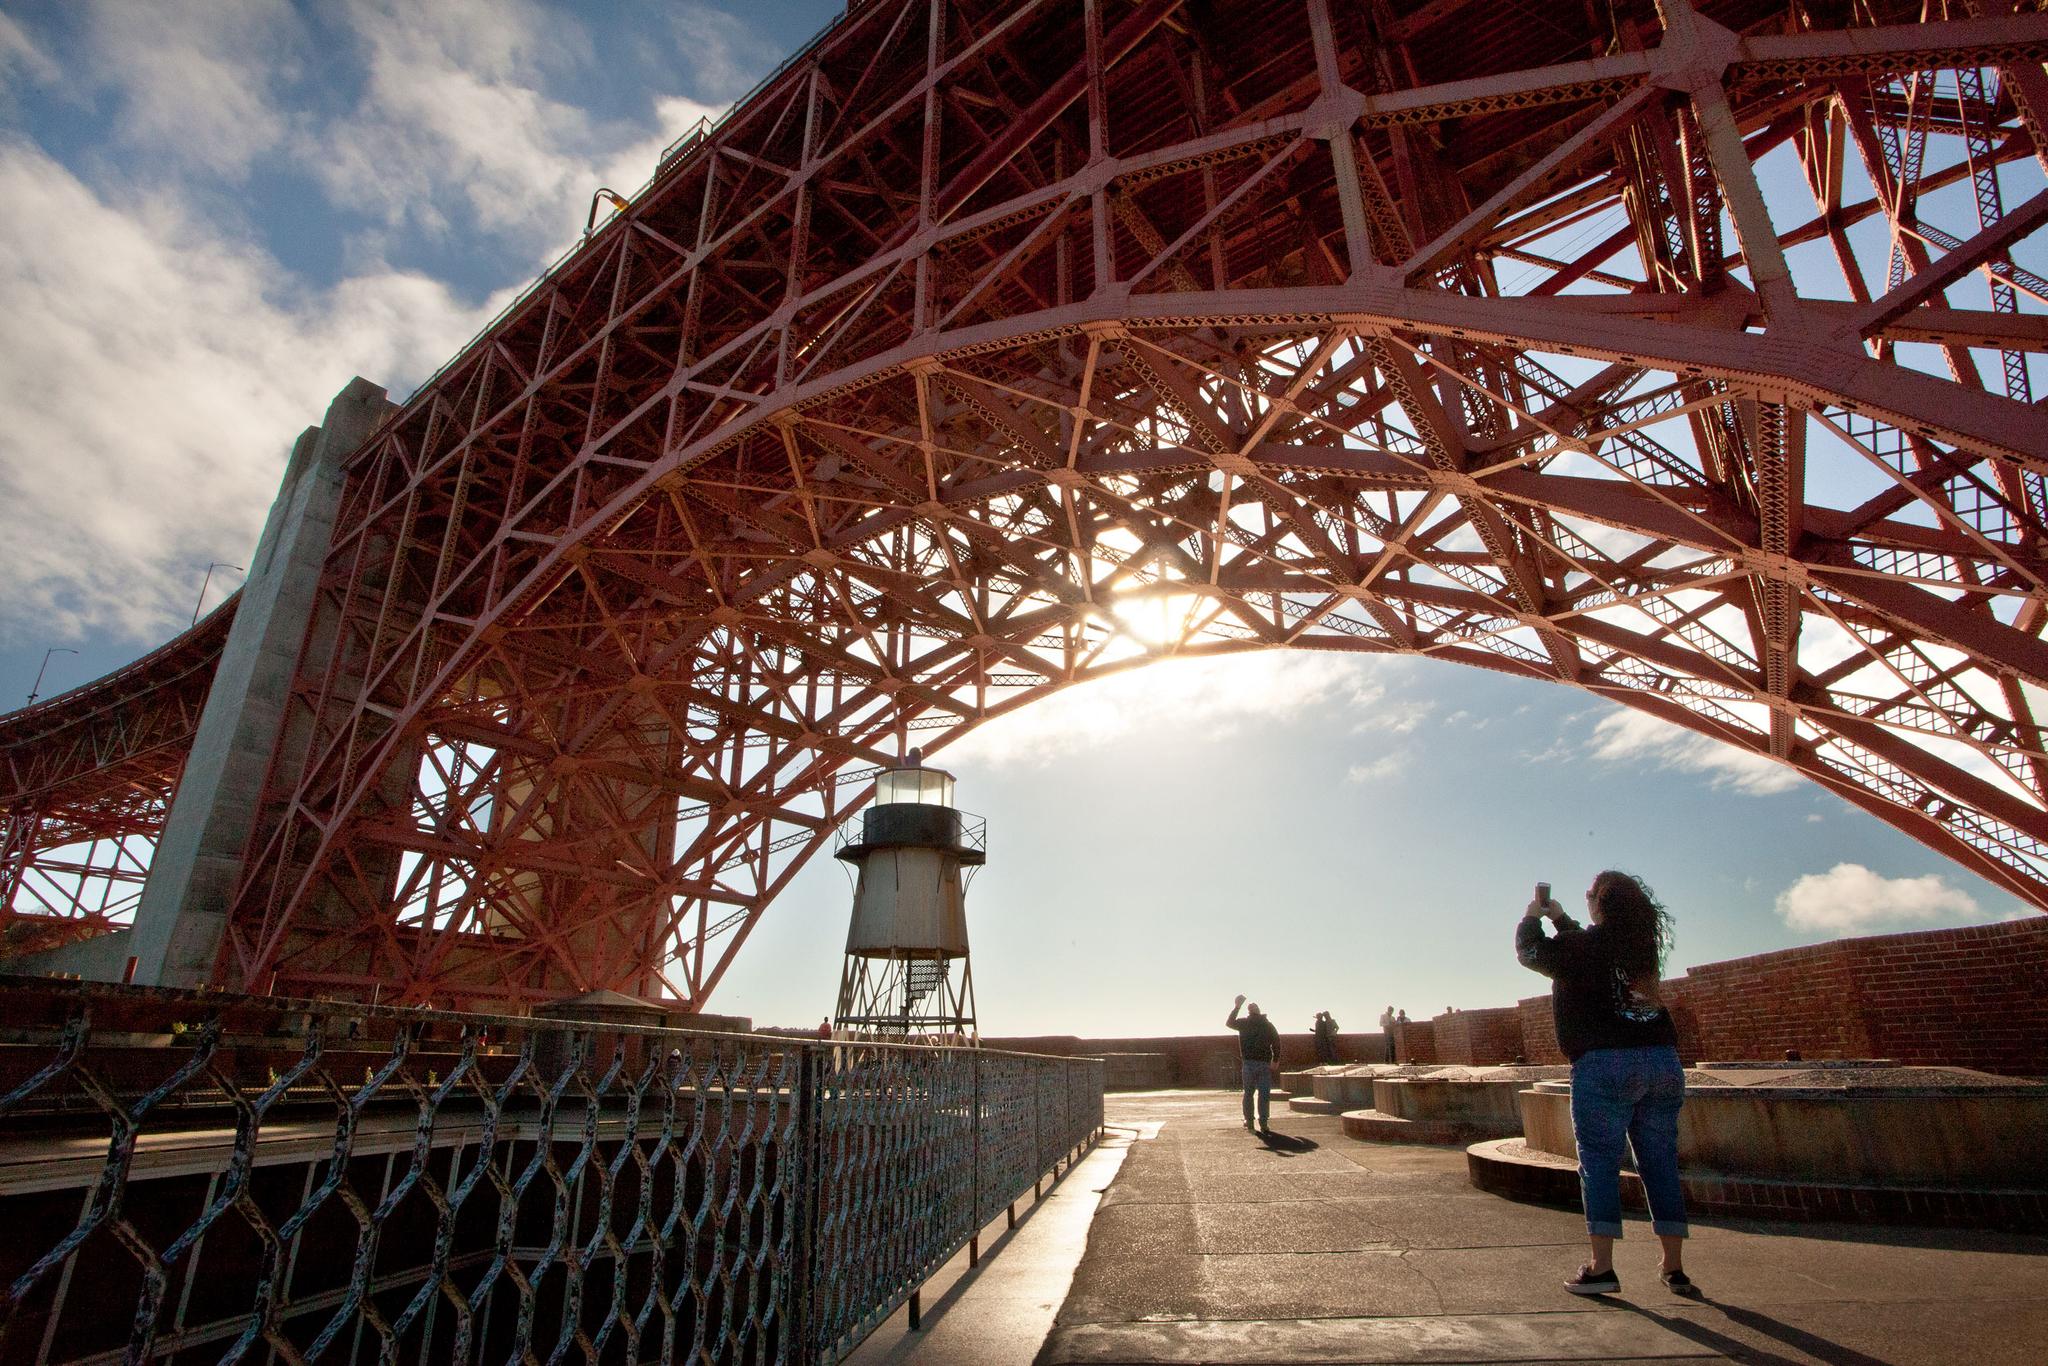 A visitor taking a photo beneath the arch at Fort Point. Photo by Scott Sawyer.